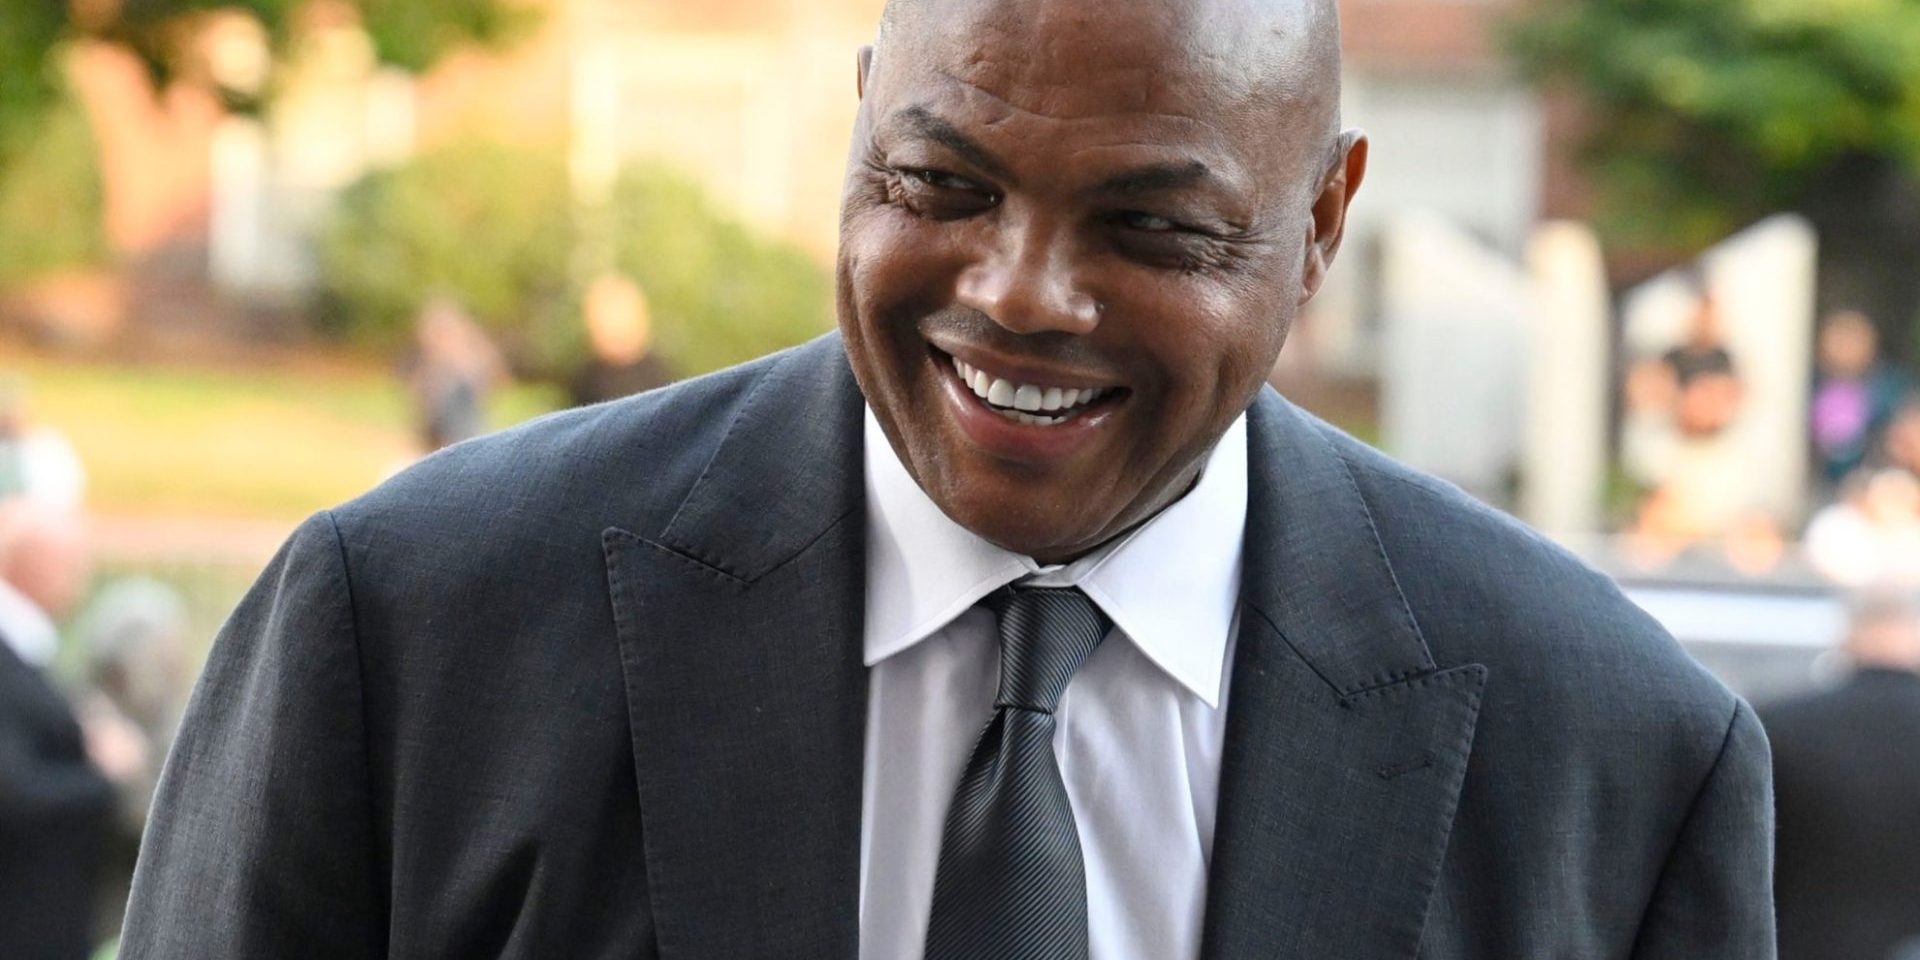 Charles Barkley throws spanner into 10-year NBA TV deal